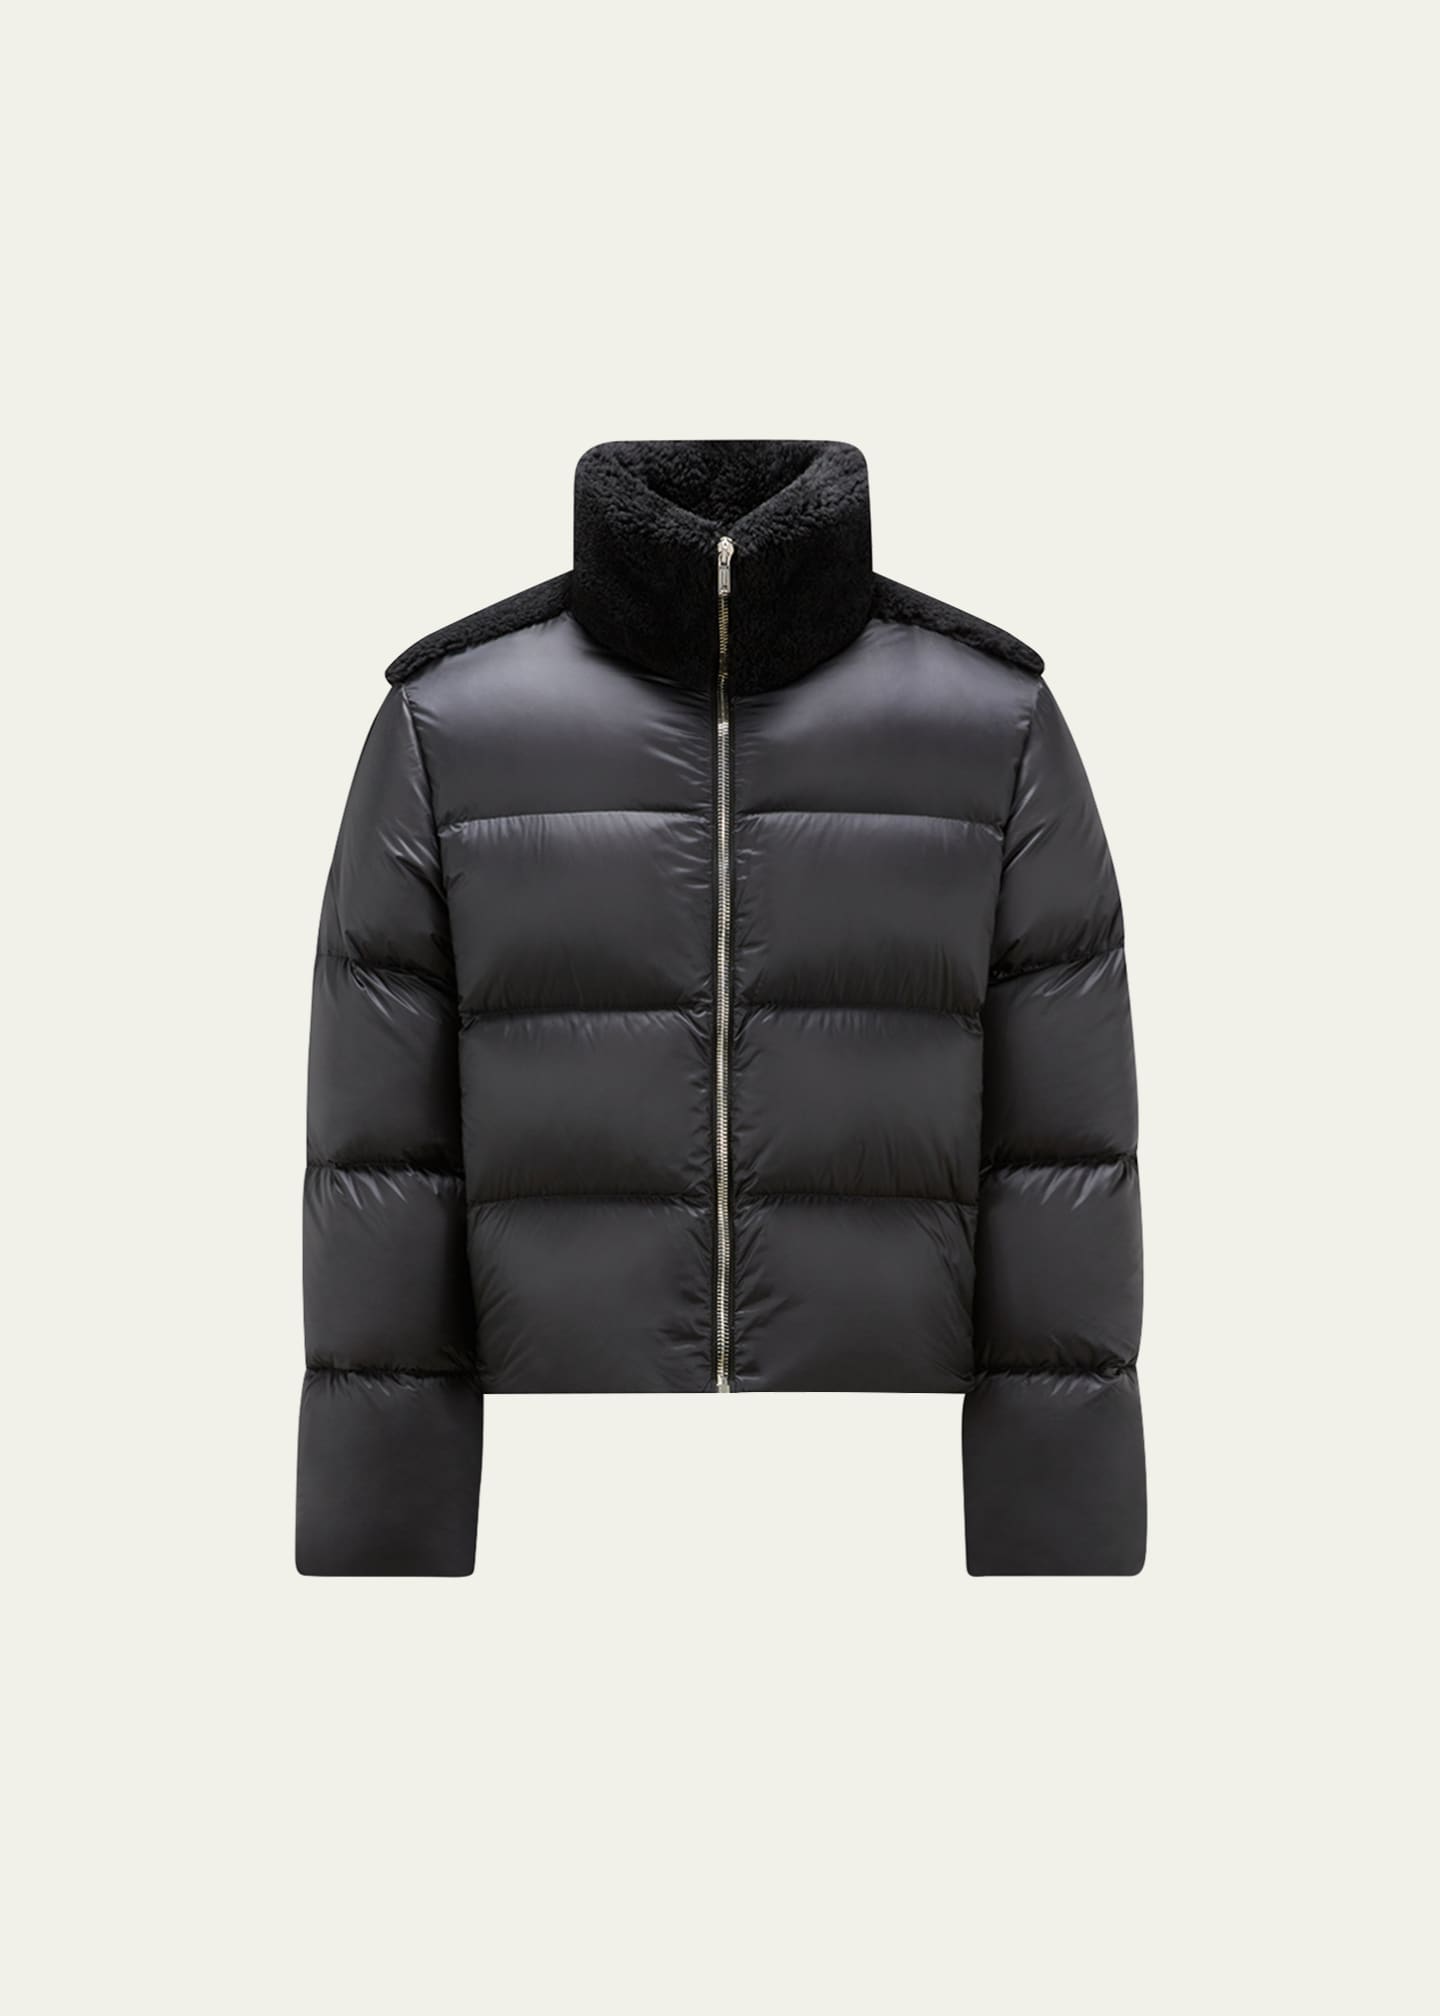 Moncler + Rick Owens x Moncler Men's Puffer Jacket with Shearling